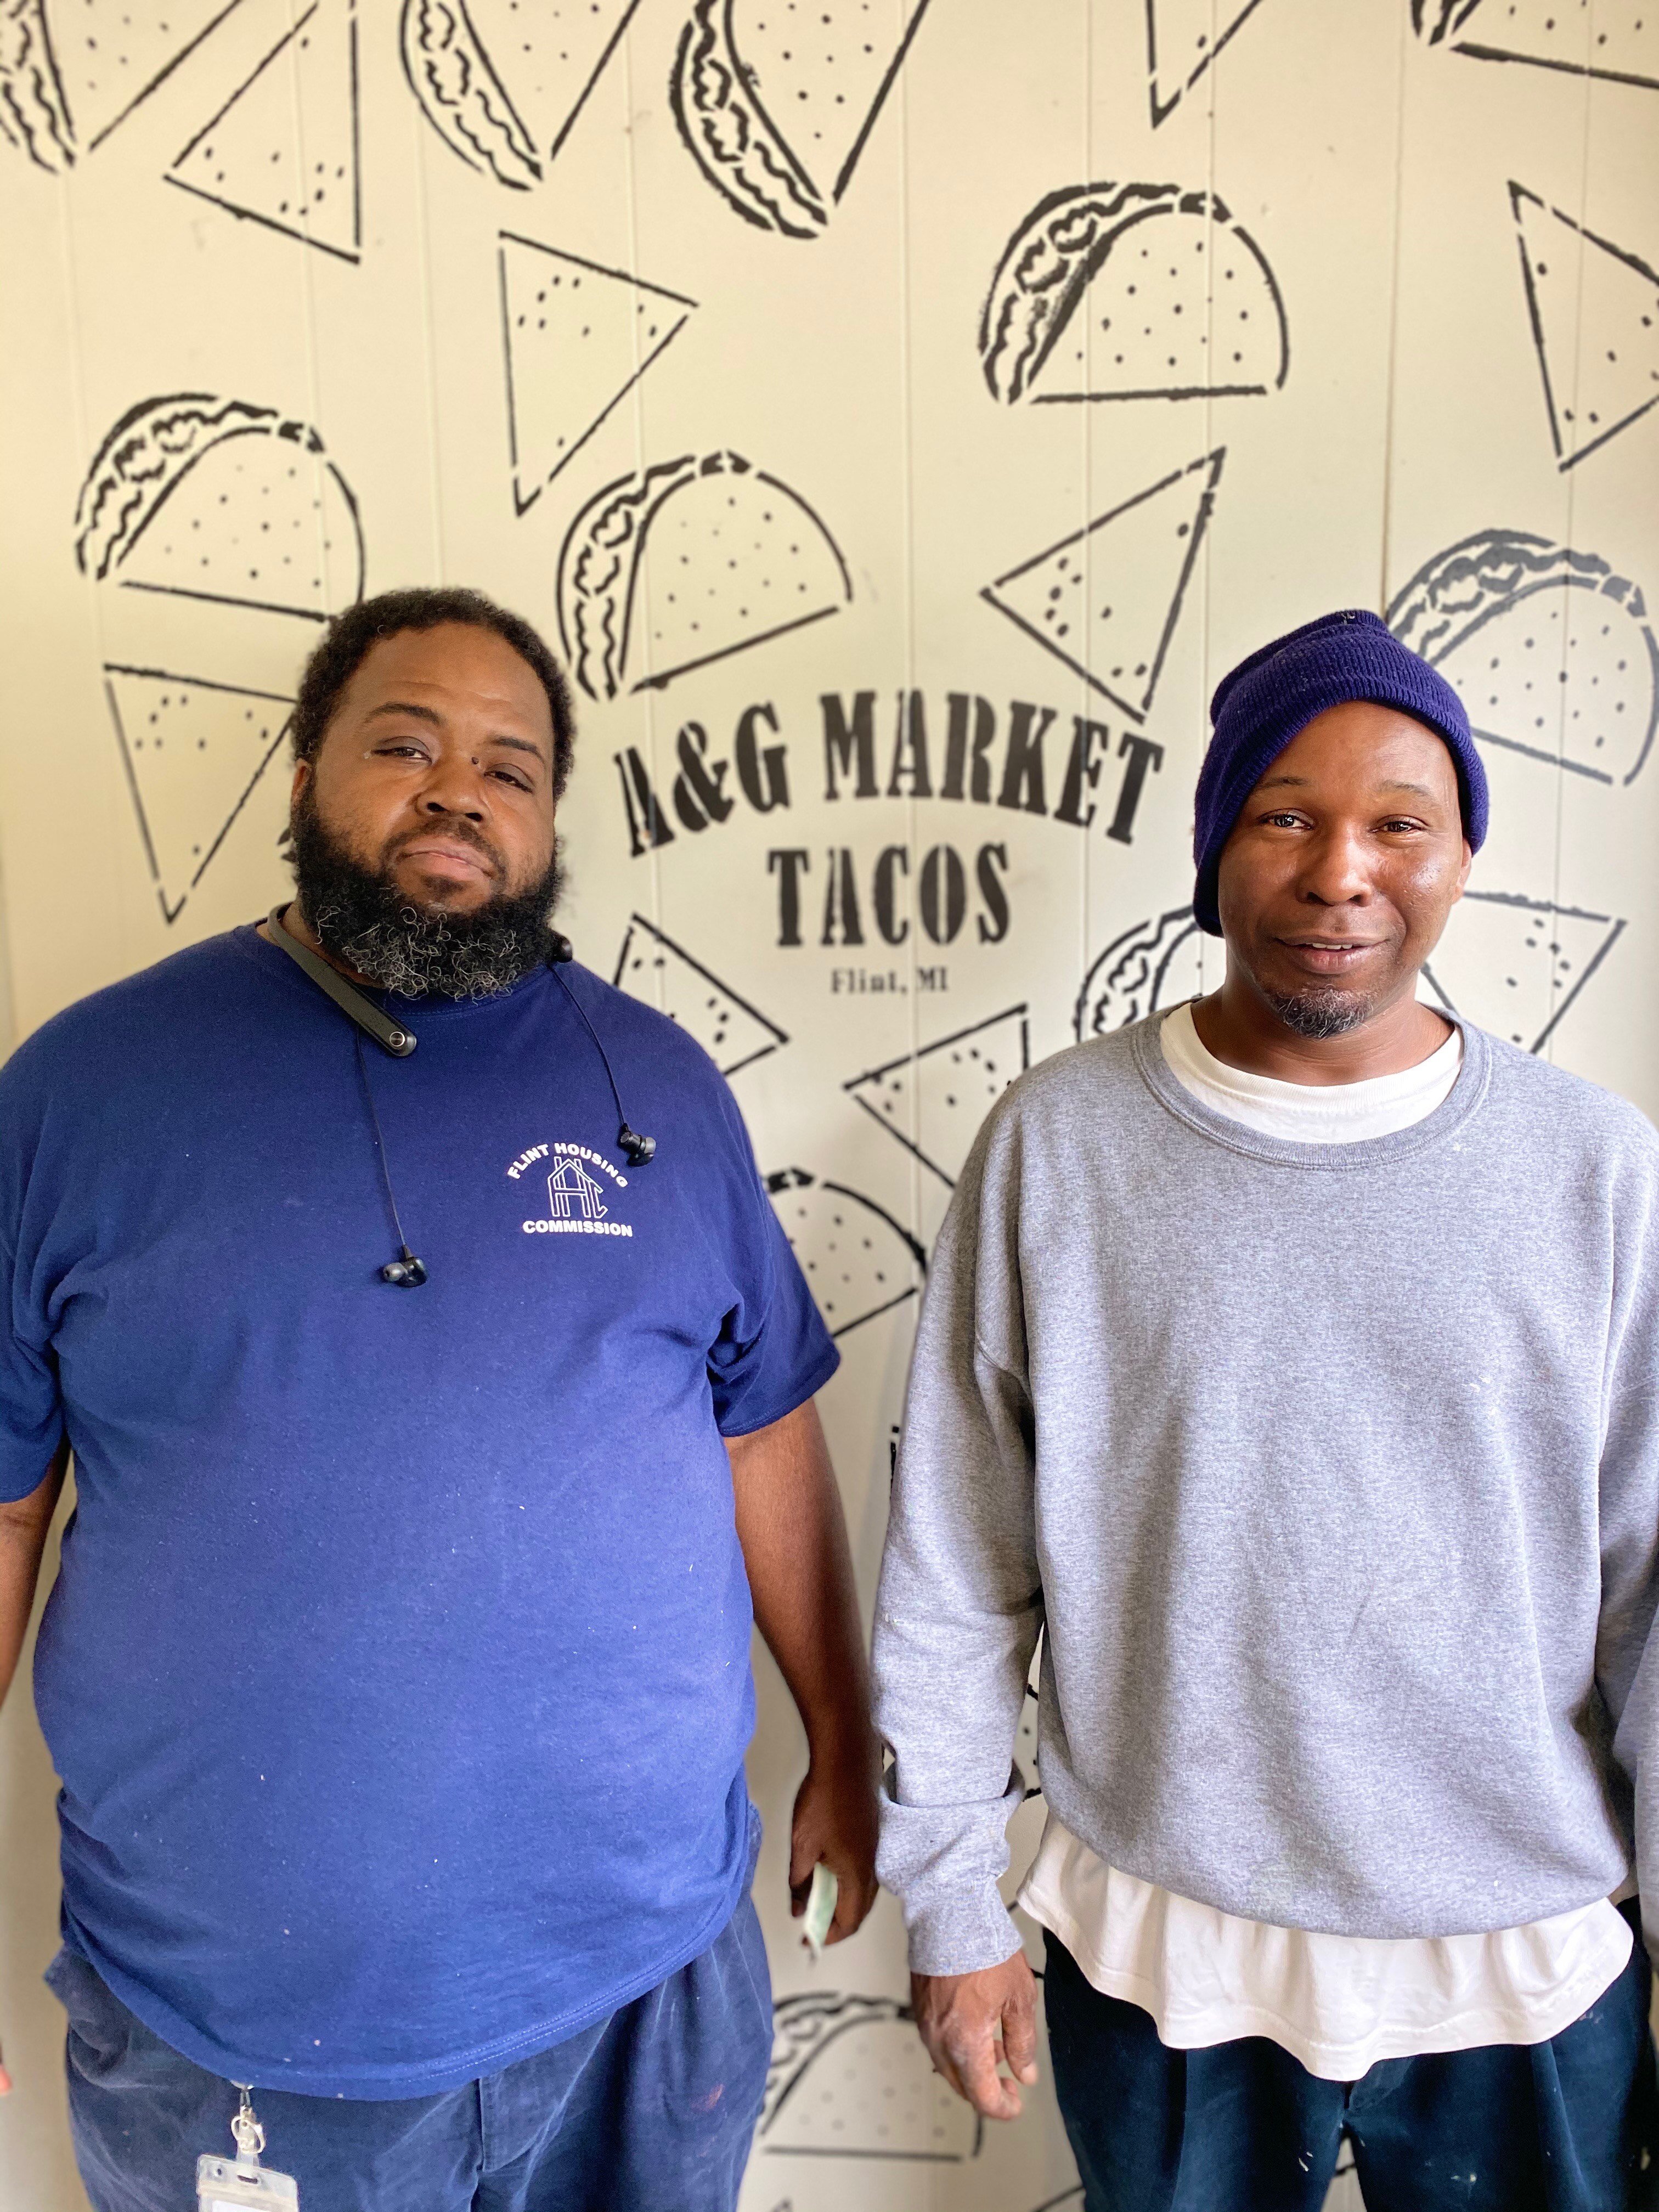 Social Media Moment: customers are encouraged to take a picture in front of the taco wall and post to their social media with the chance to make it to the Wall of Fame.